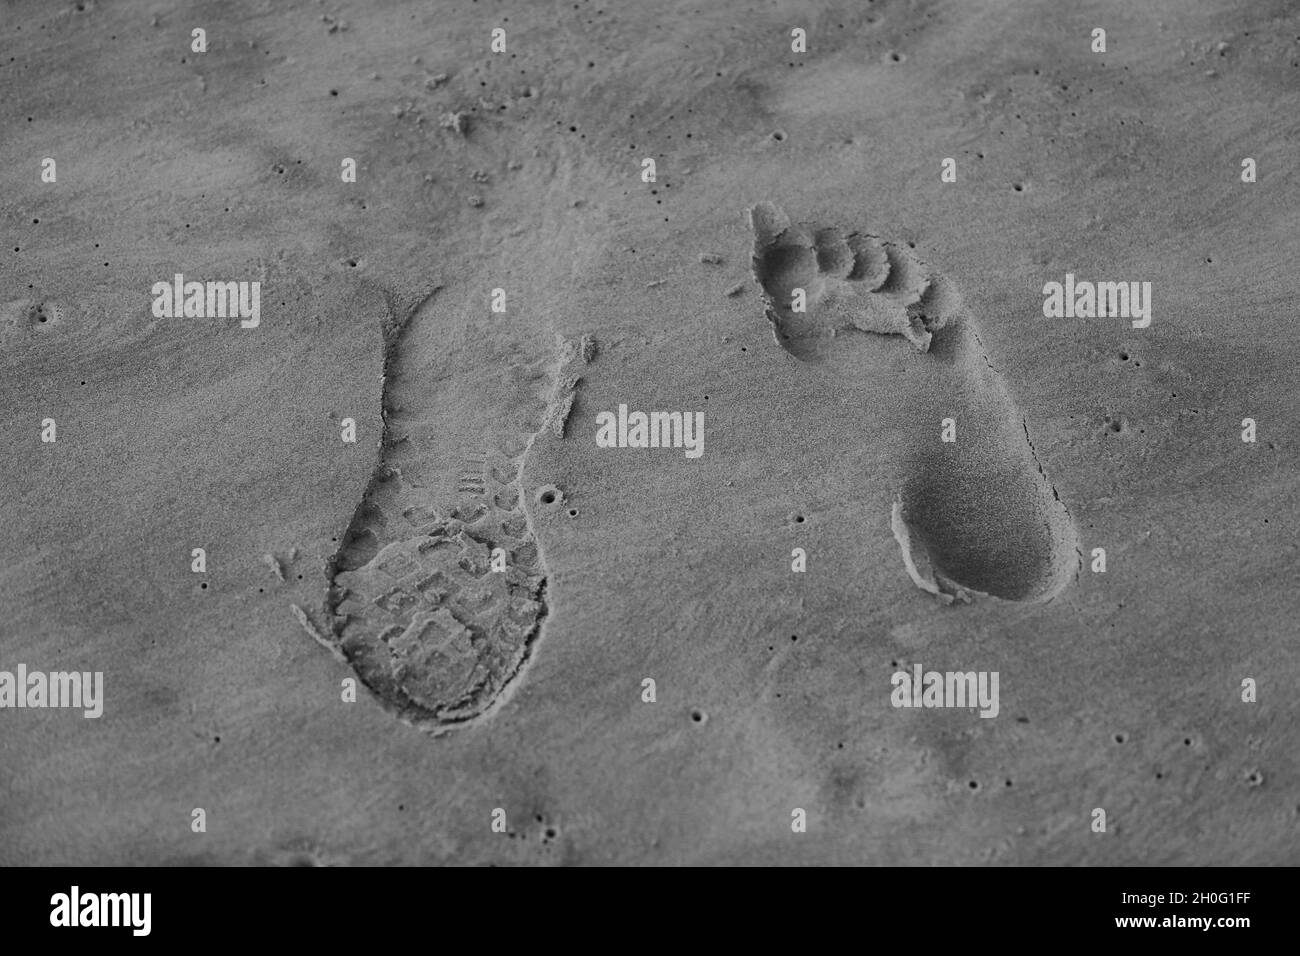 Two feet, one bare & one in shoes, going in opposite directions, close-up on beach sand. Stock Photo